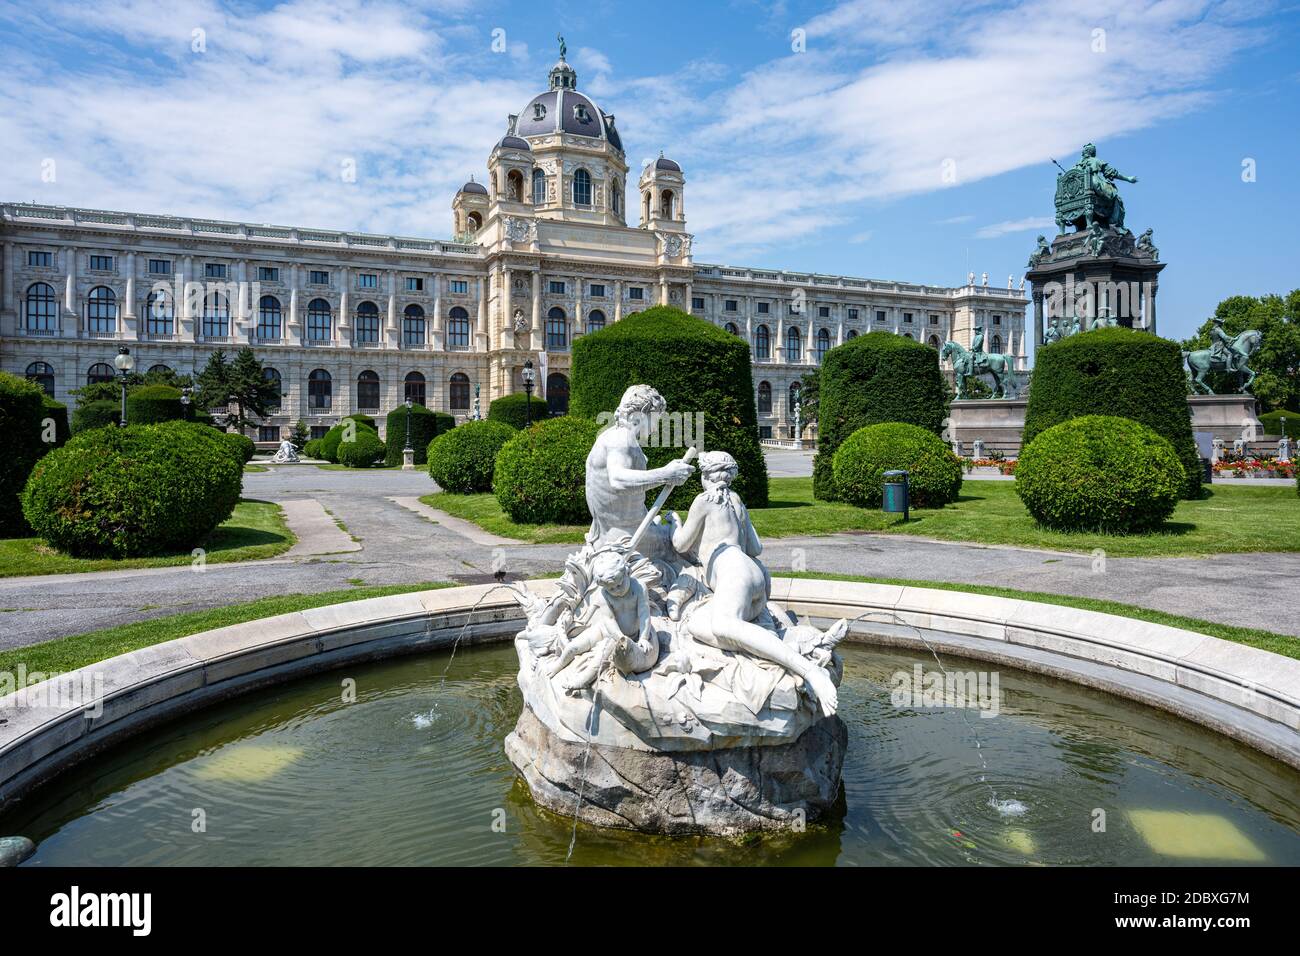 The Natural History Museum with a small sculpture in Vienna, Austria Stock Photo